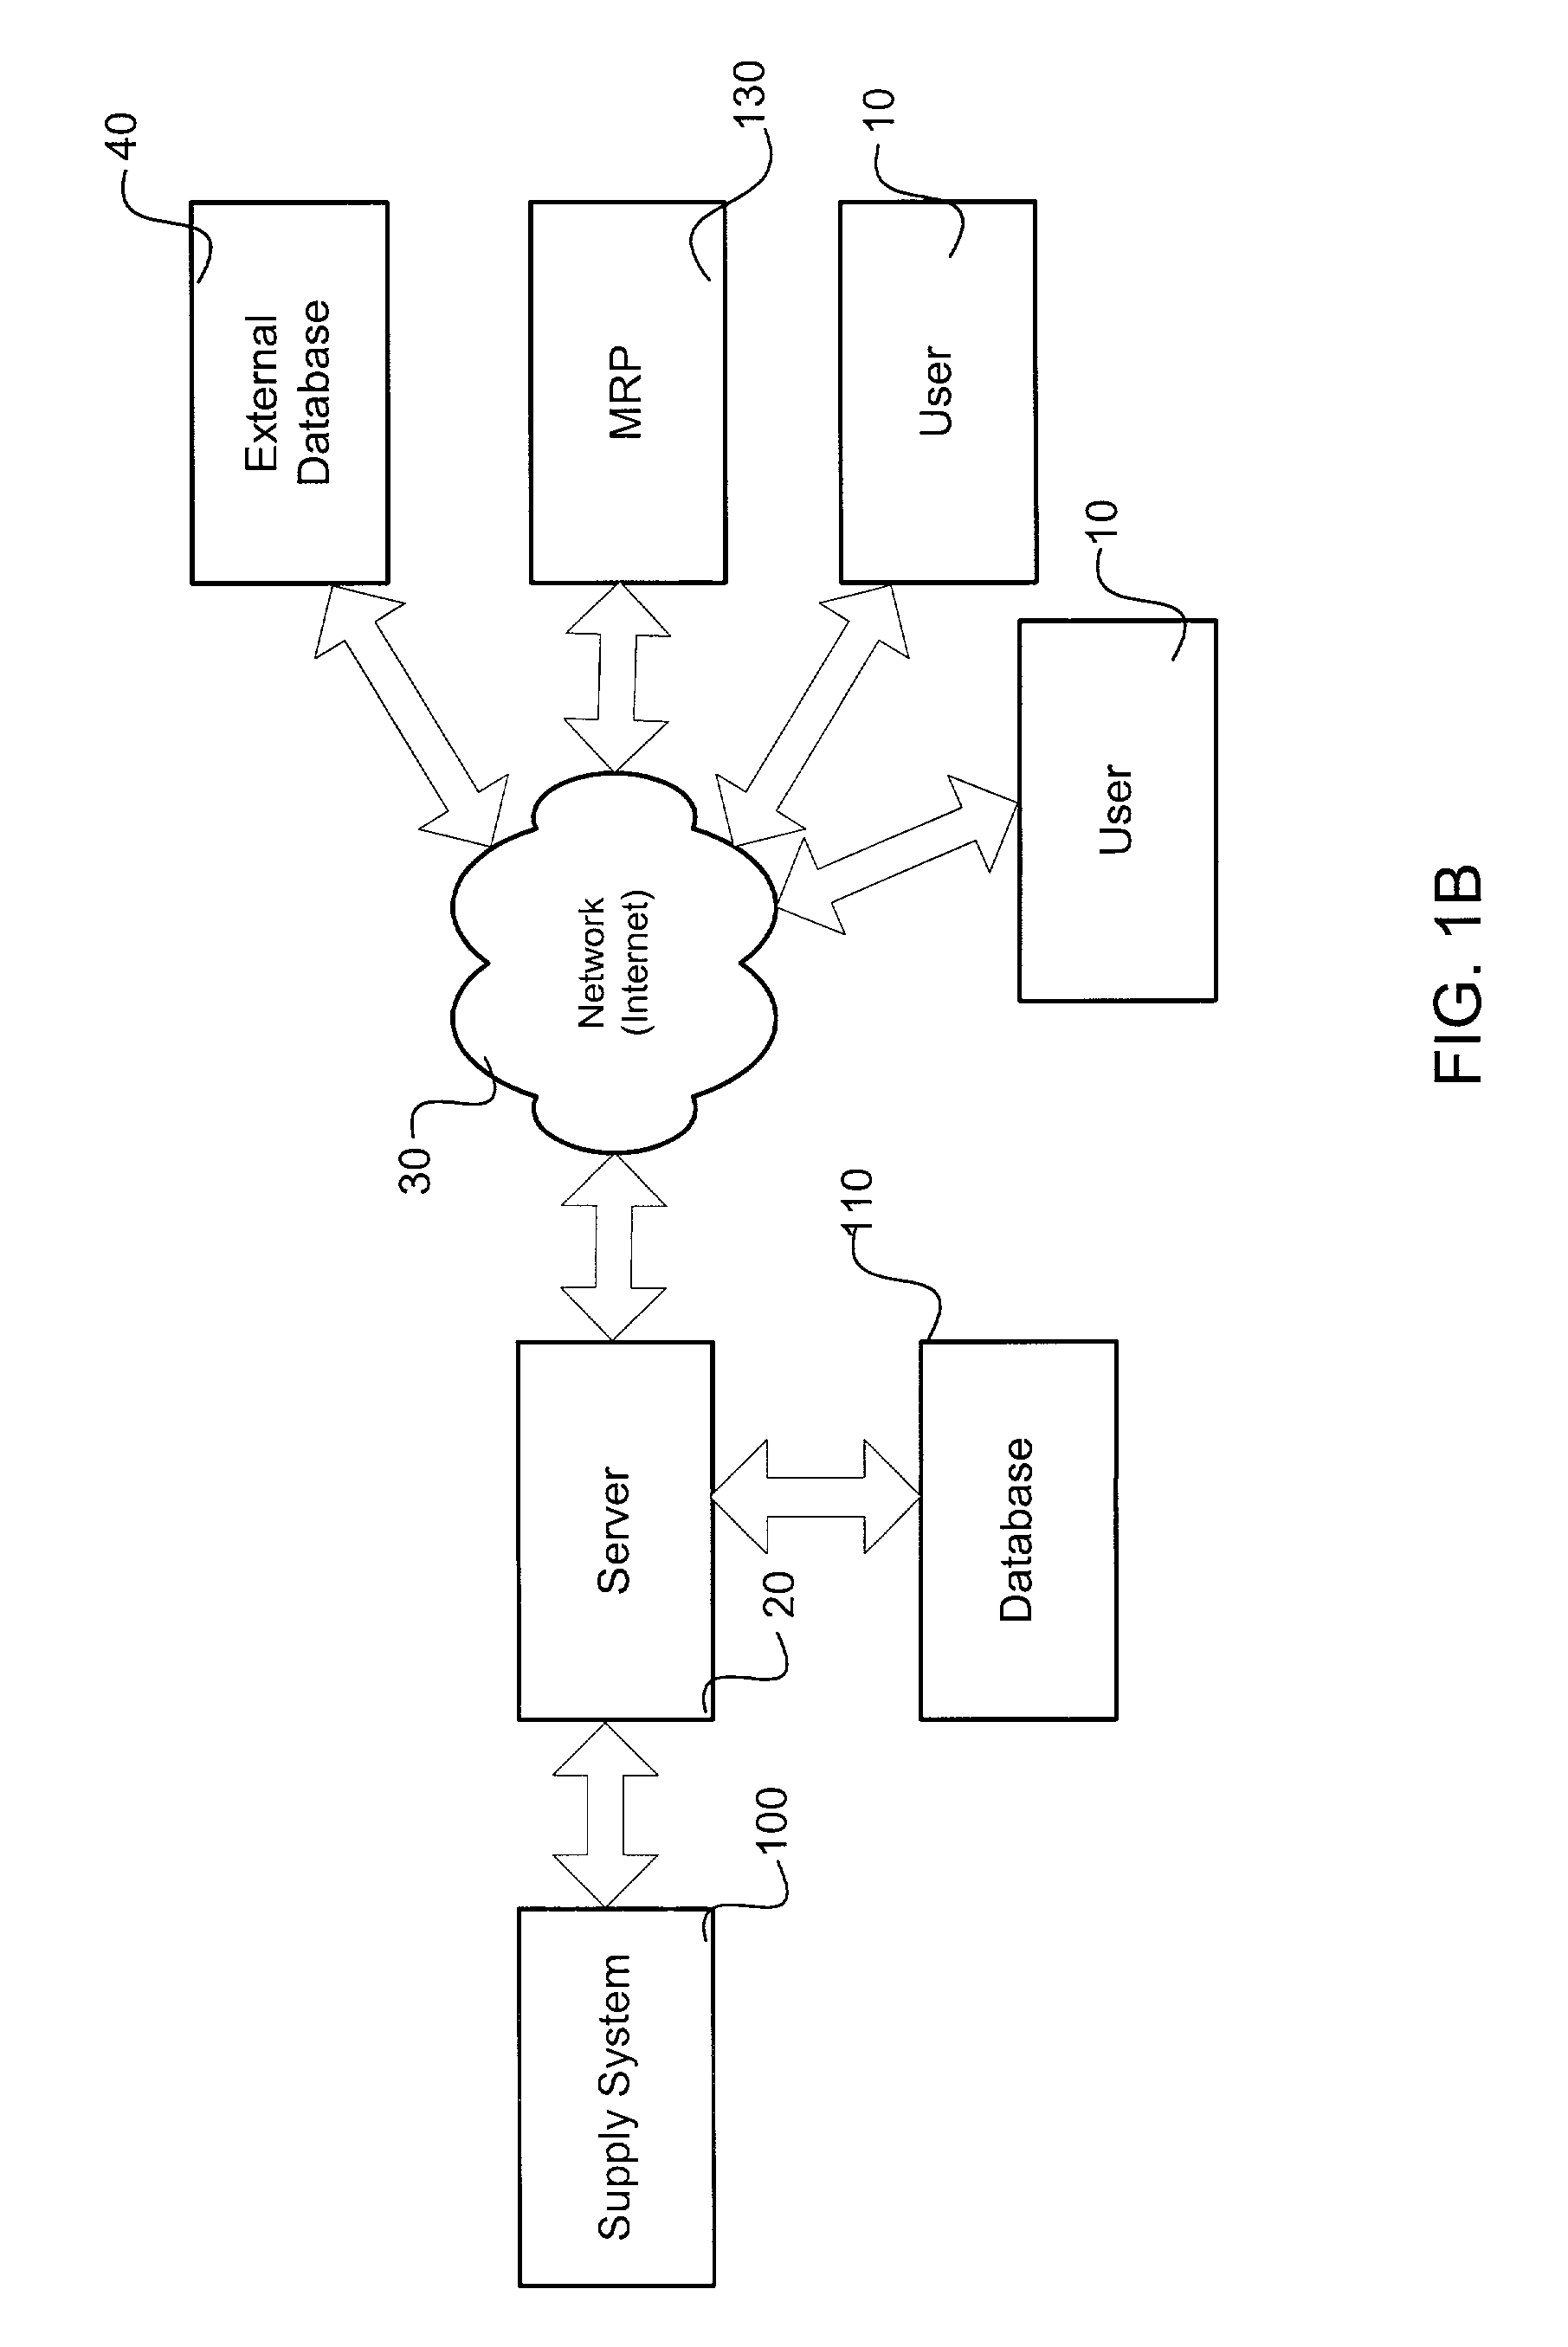 System and method for allocating the supply of critical material components and manufacturing capacity